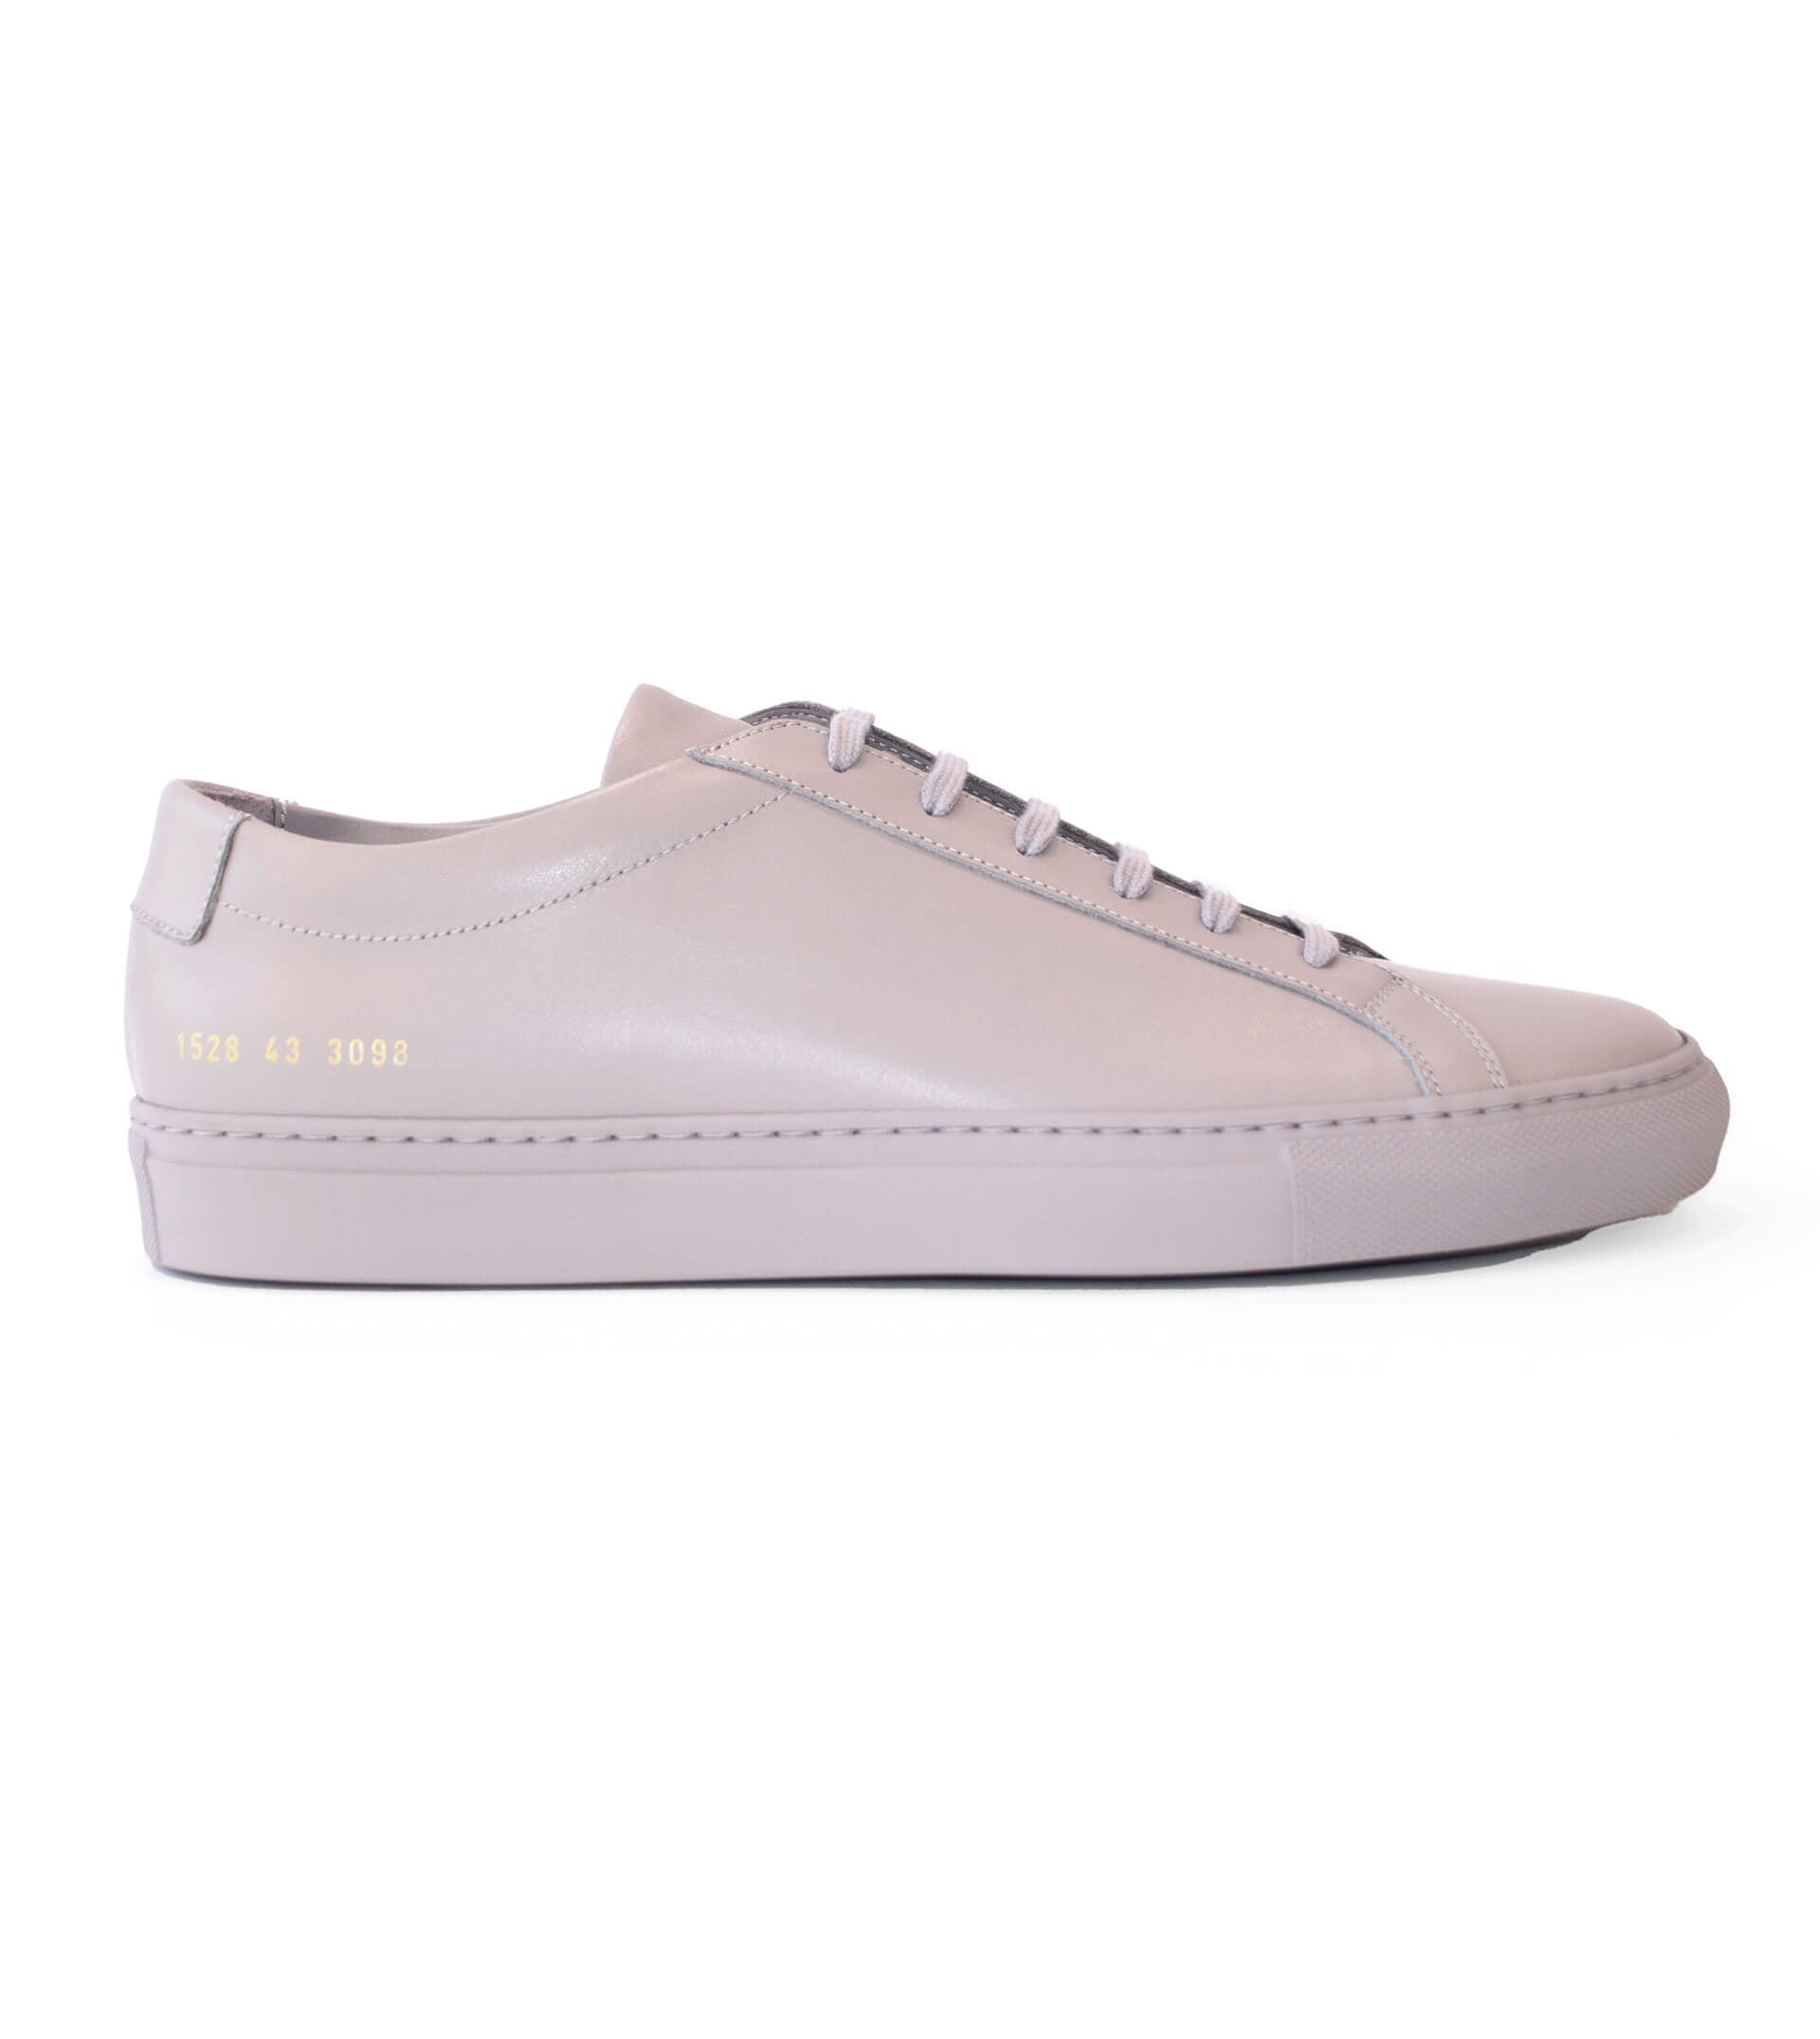 COMMON PROJECTS Achilles Leather | Malouf Authentic Luxury